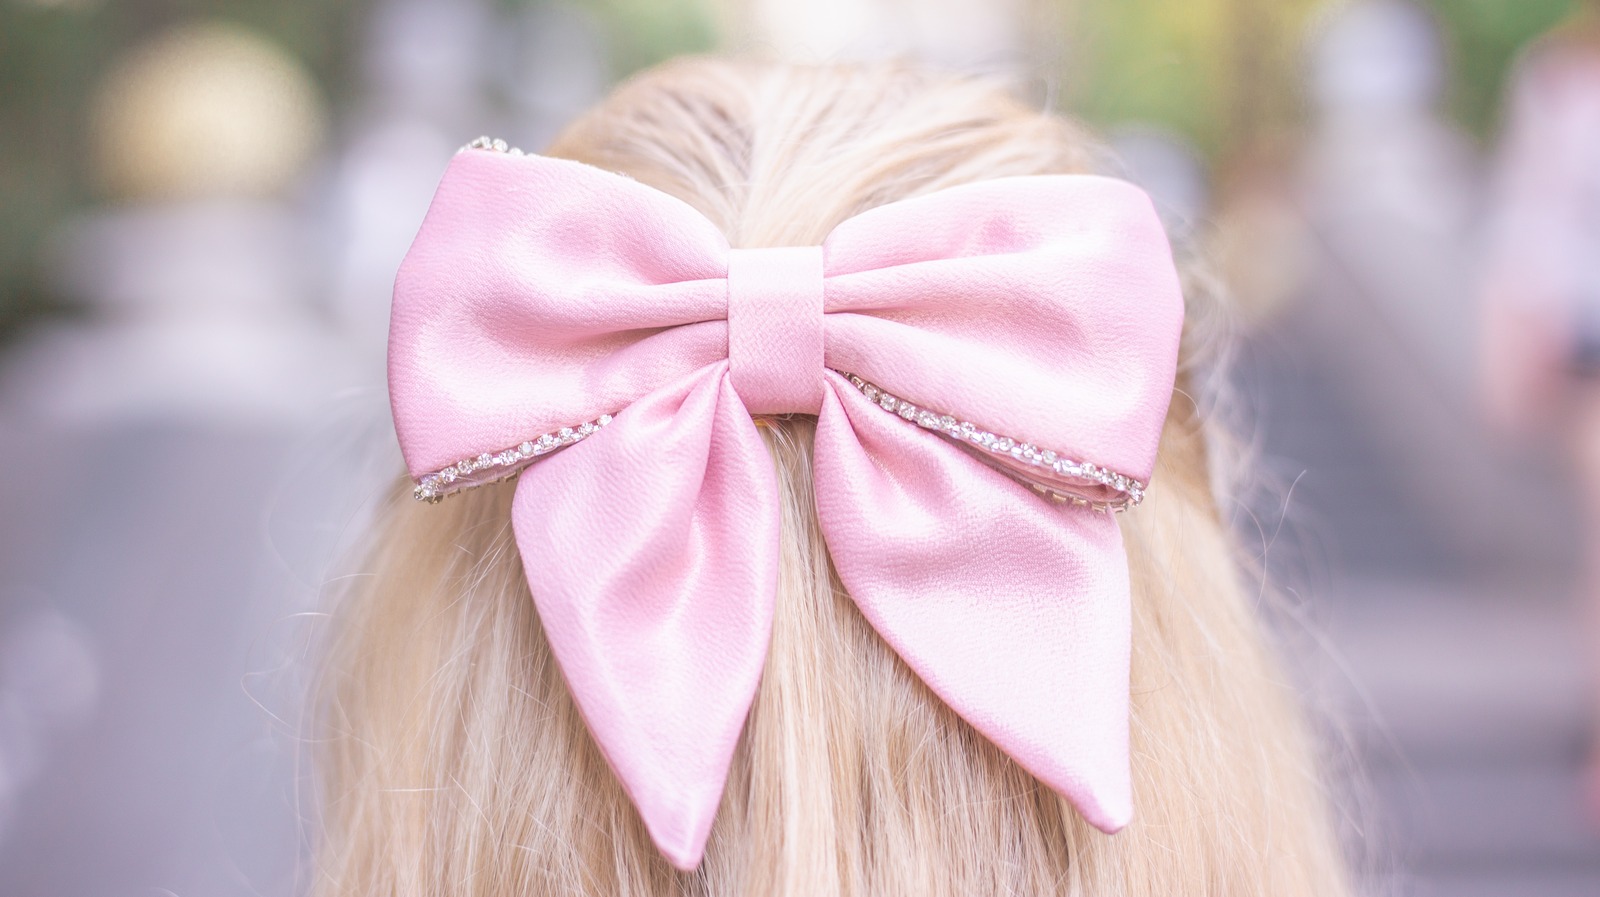 Hair Ribbons and Bows - Celebrities Wearing Ribbons and Bows in